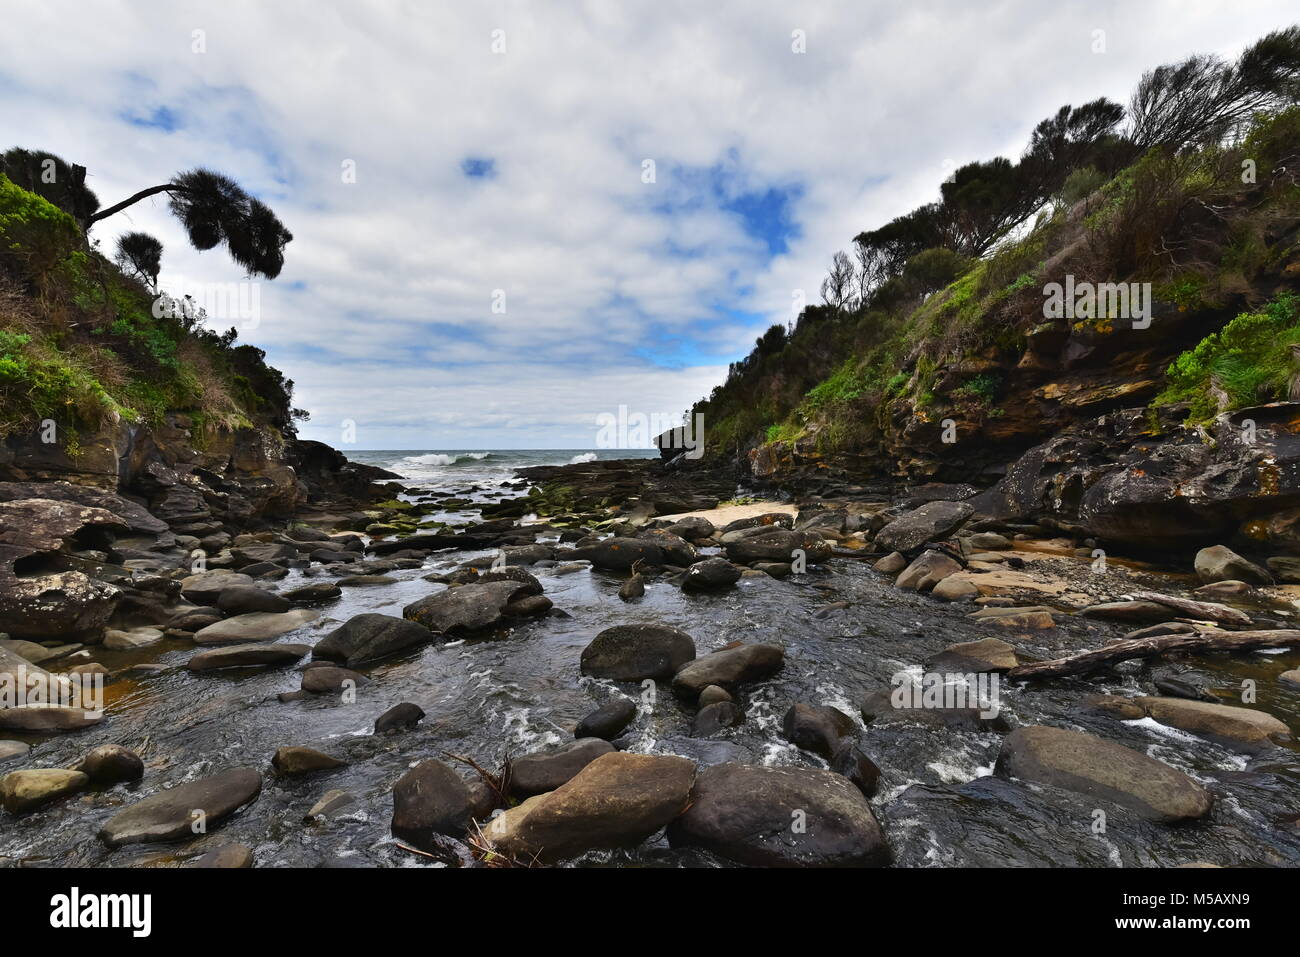 Magnificent Lunch Stop on the banks of the Elliot River,The Great Ocean Walk, Apollo Bay,Great Otway National Park,Victoria Australia Stock Photo